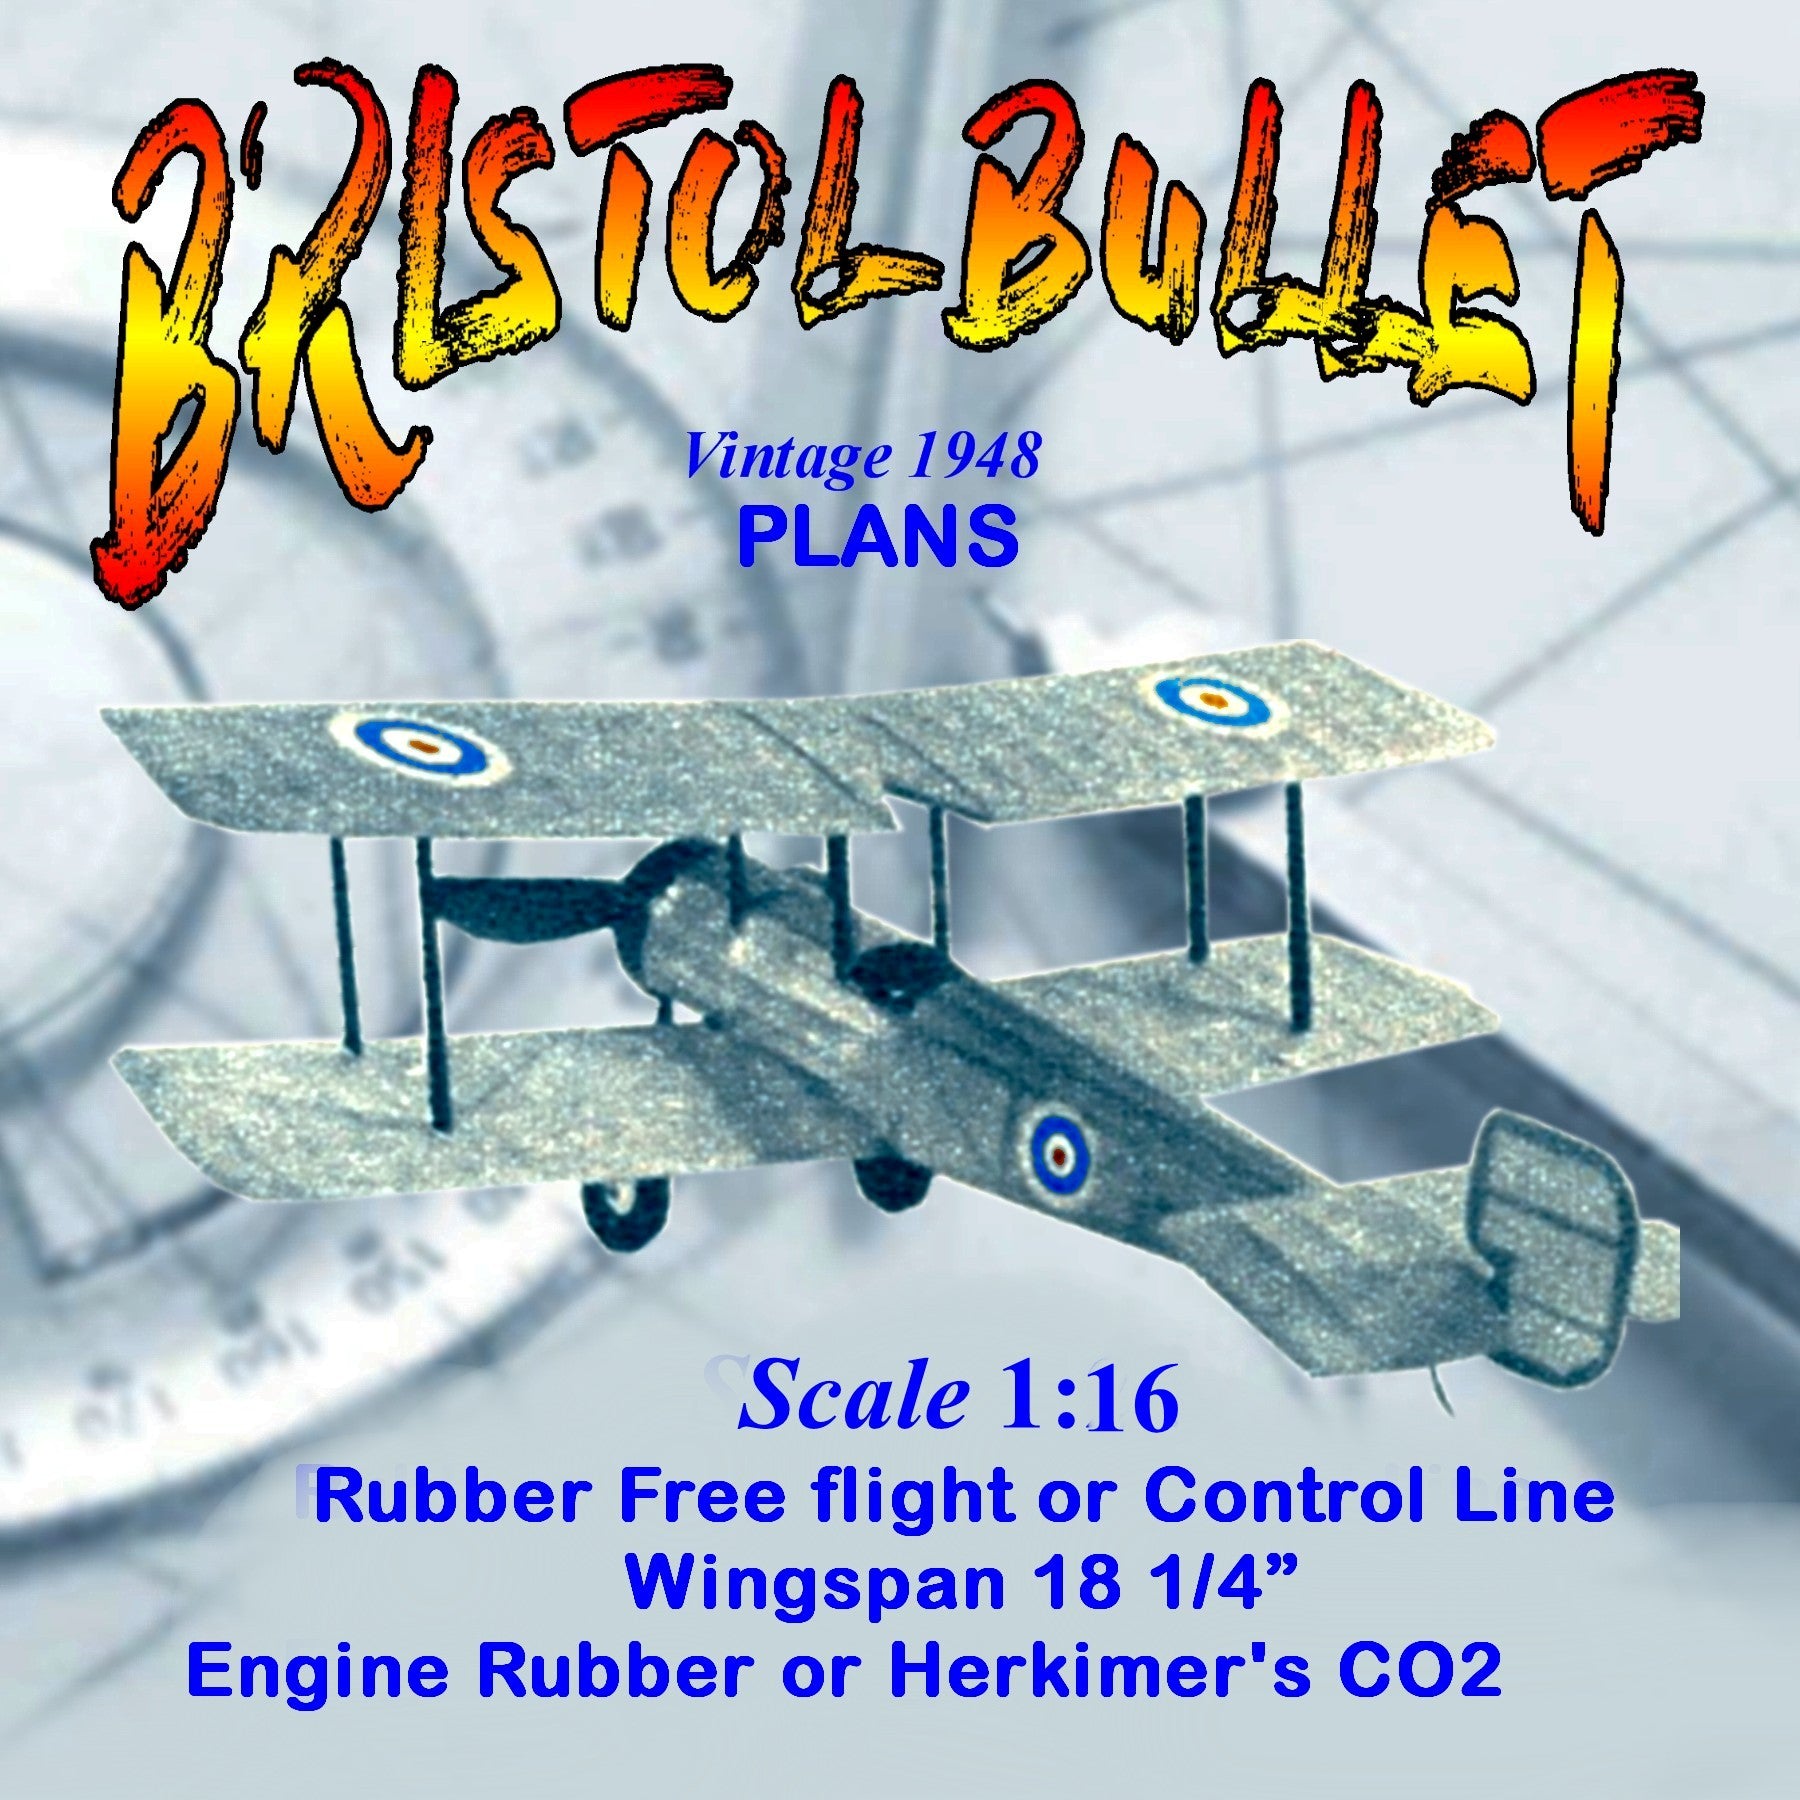 full size printed plans scale 1:16 free flight or control line bristol bullet power rubber or co2